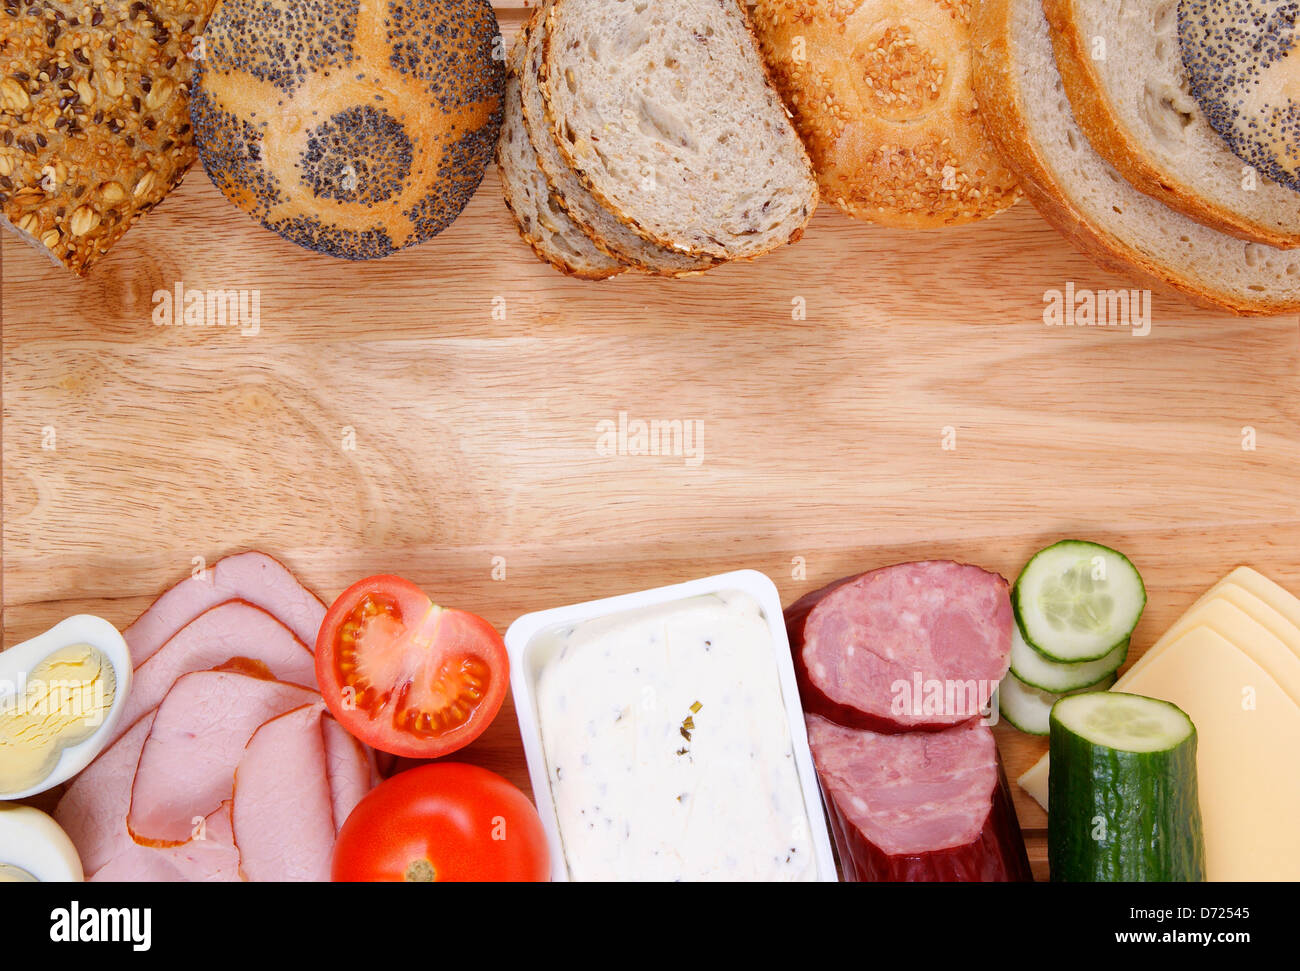 variable types of bread and products as background Stock Photo